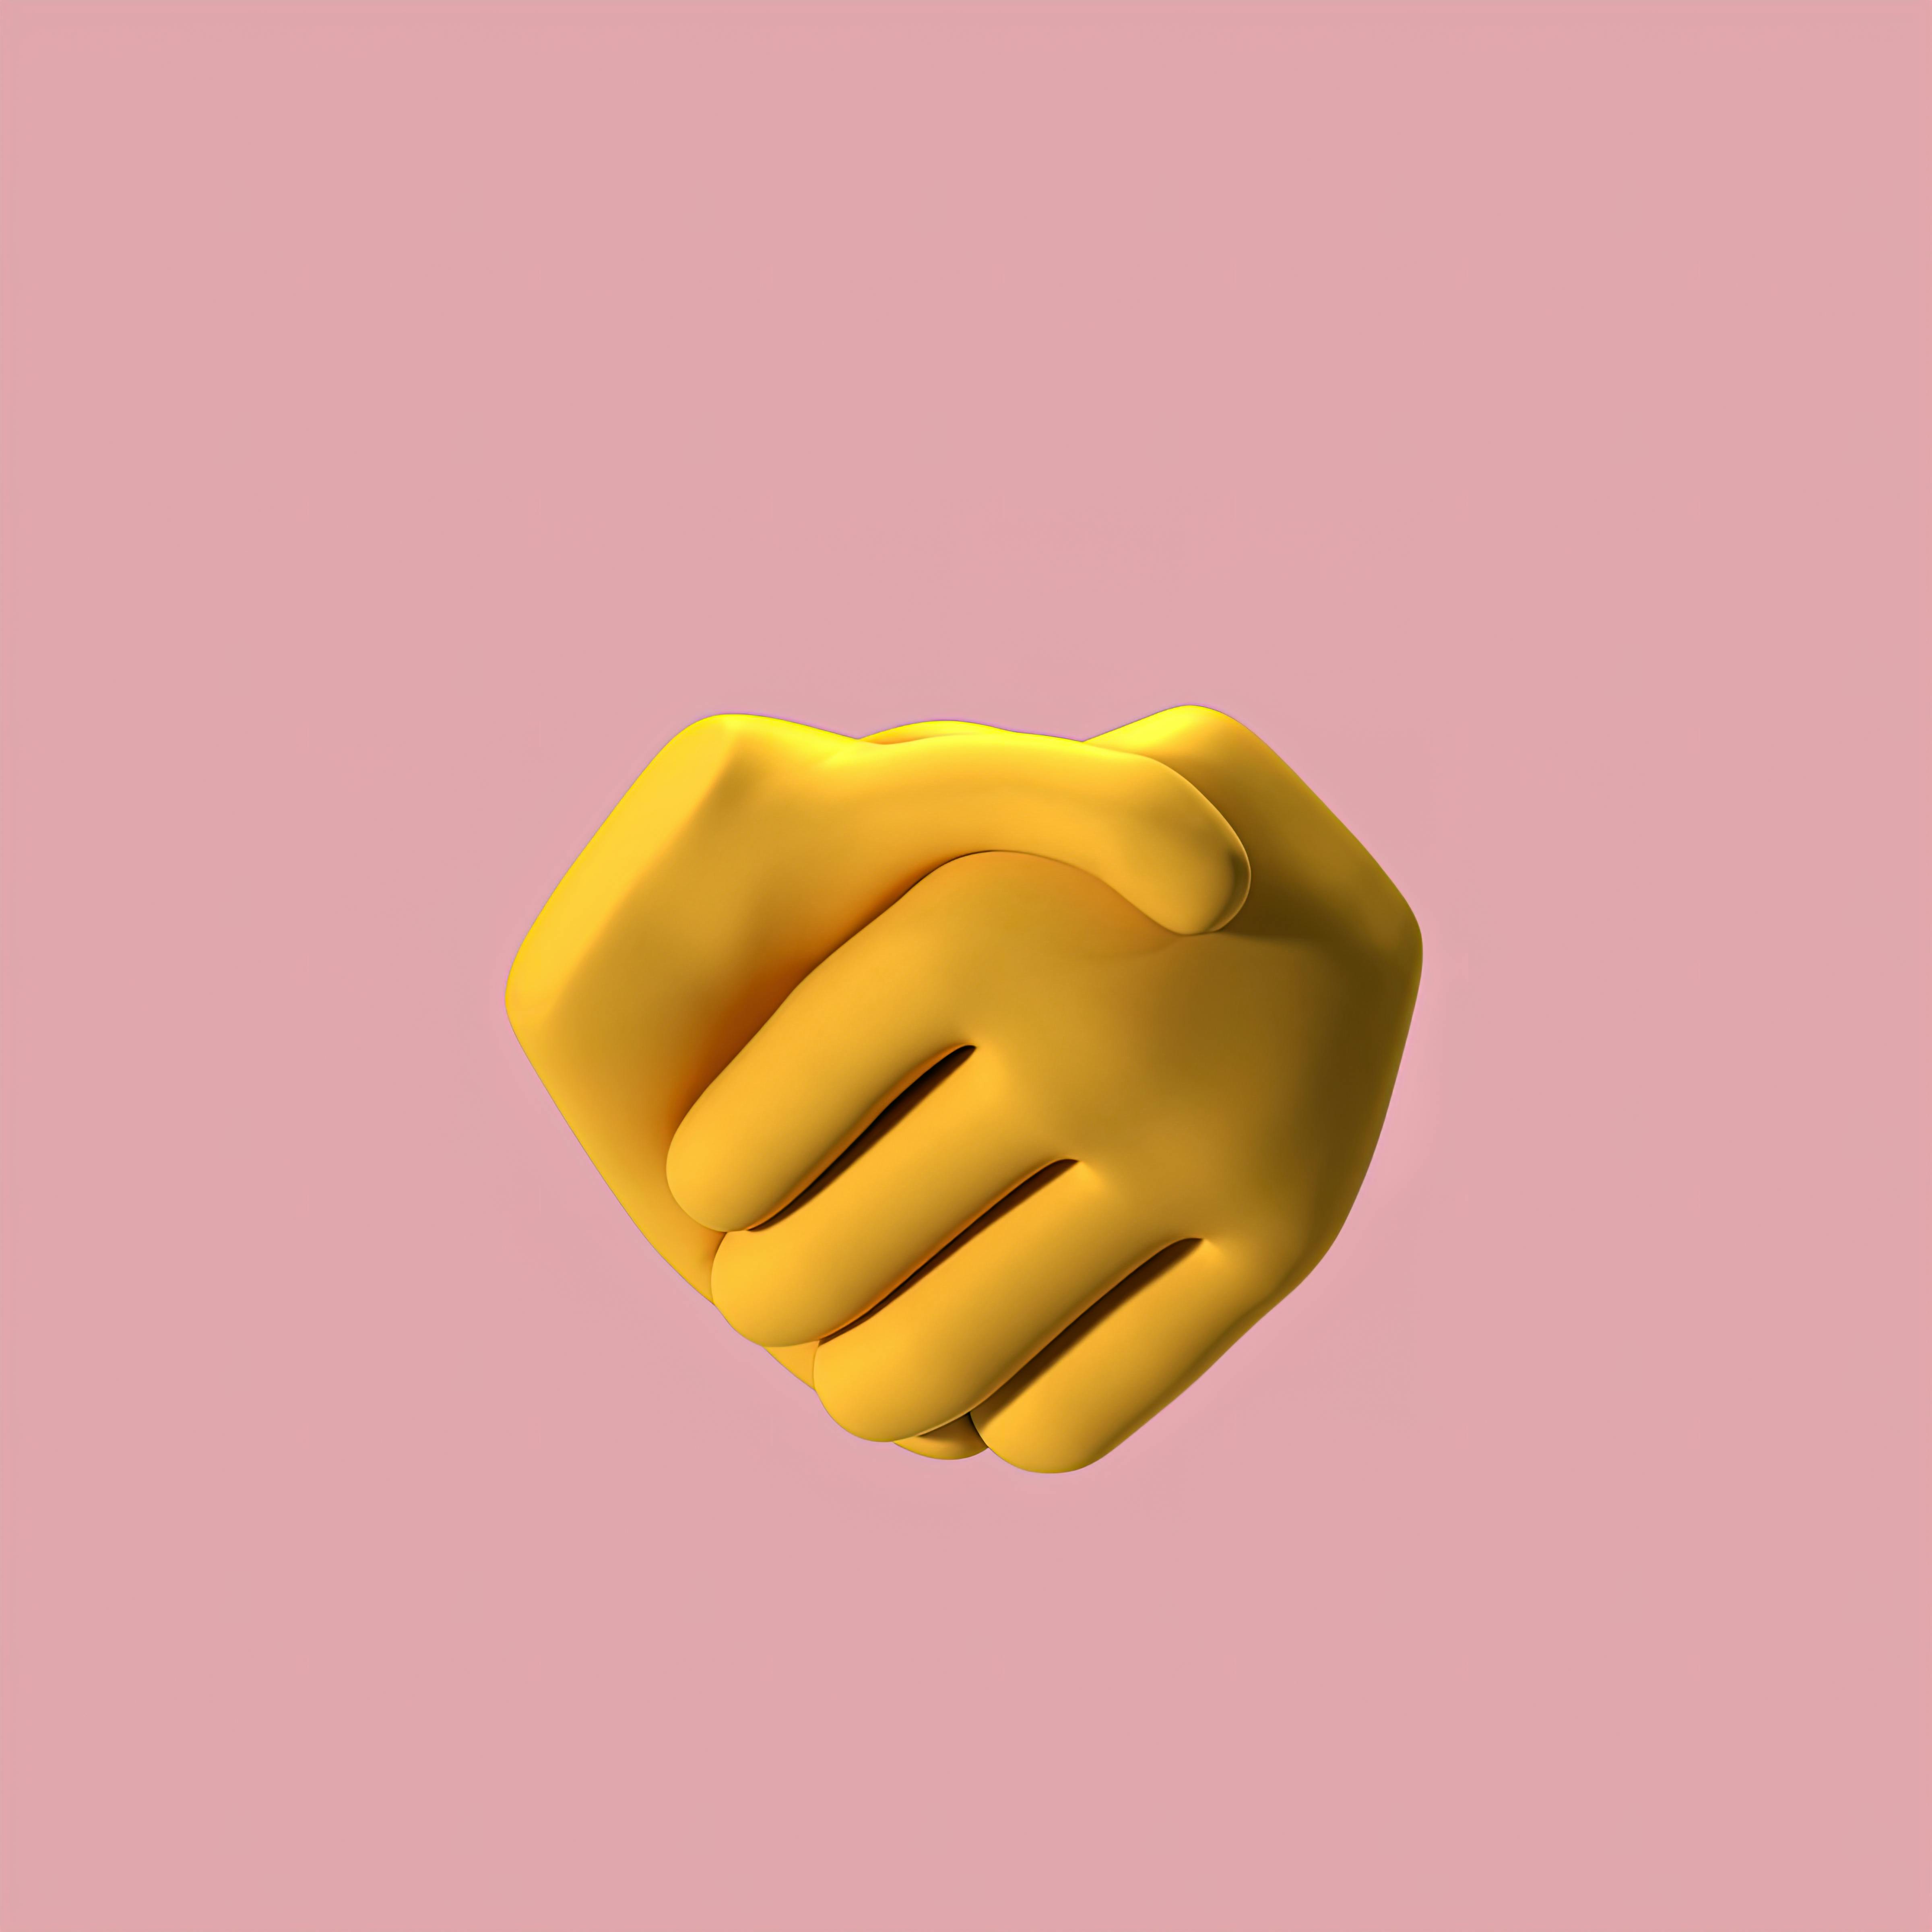 A 3D Illustration of a Handshake · Free Stock Photo